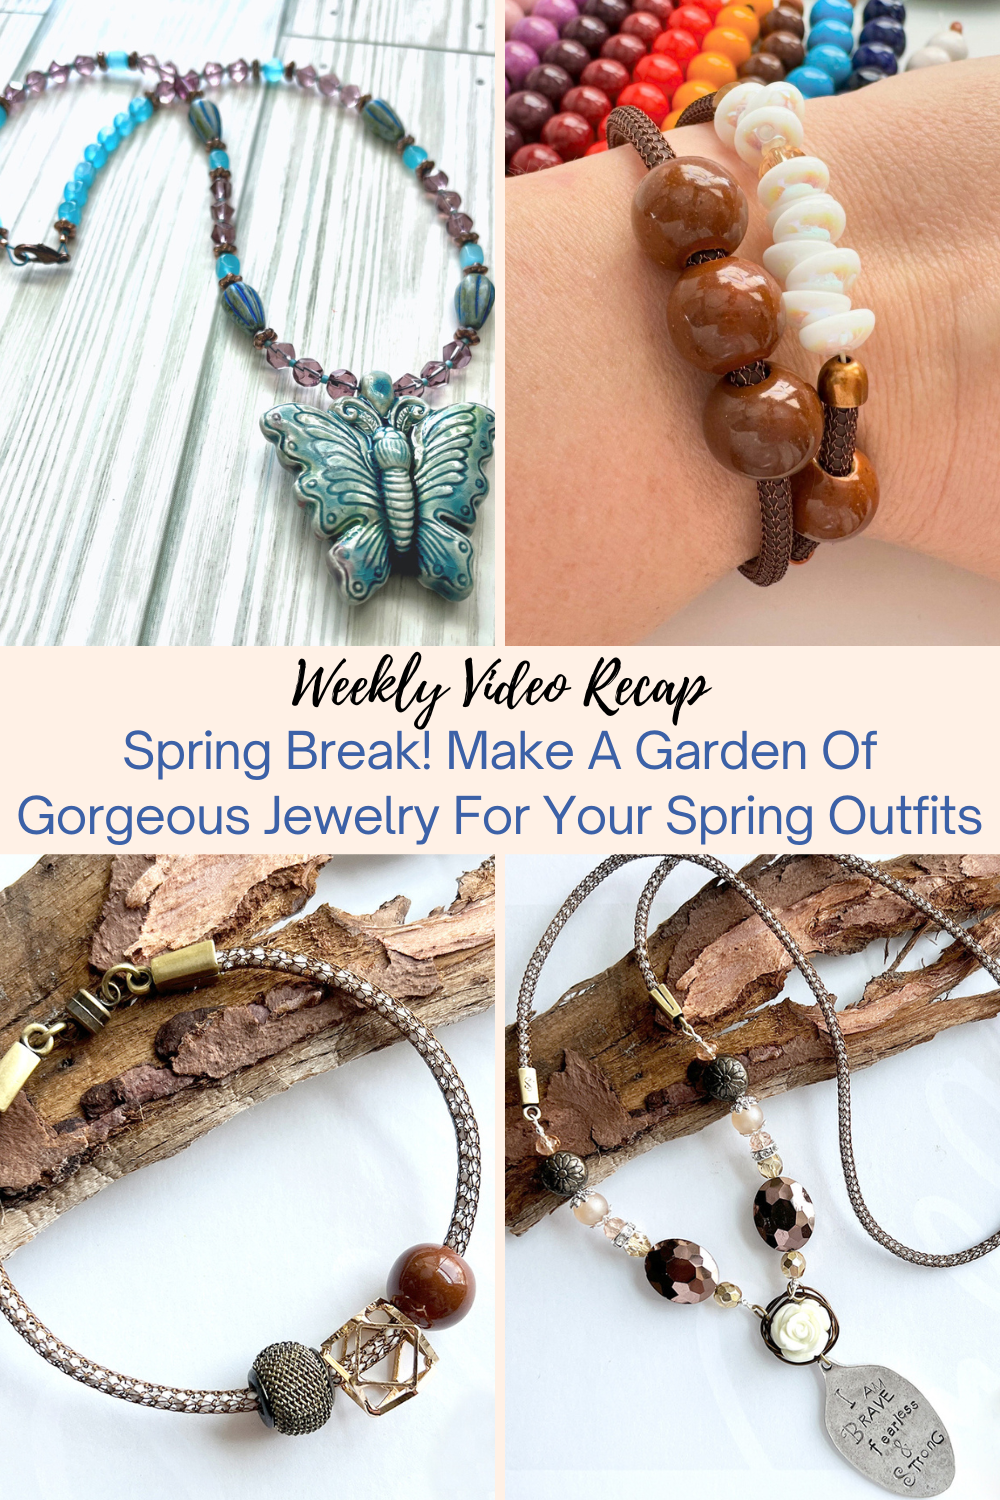 Spring Break! Make A Garden Of Gorgeous Jewelry For Your Spring Outfits Collage